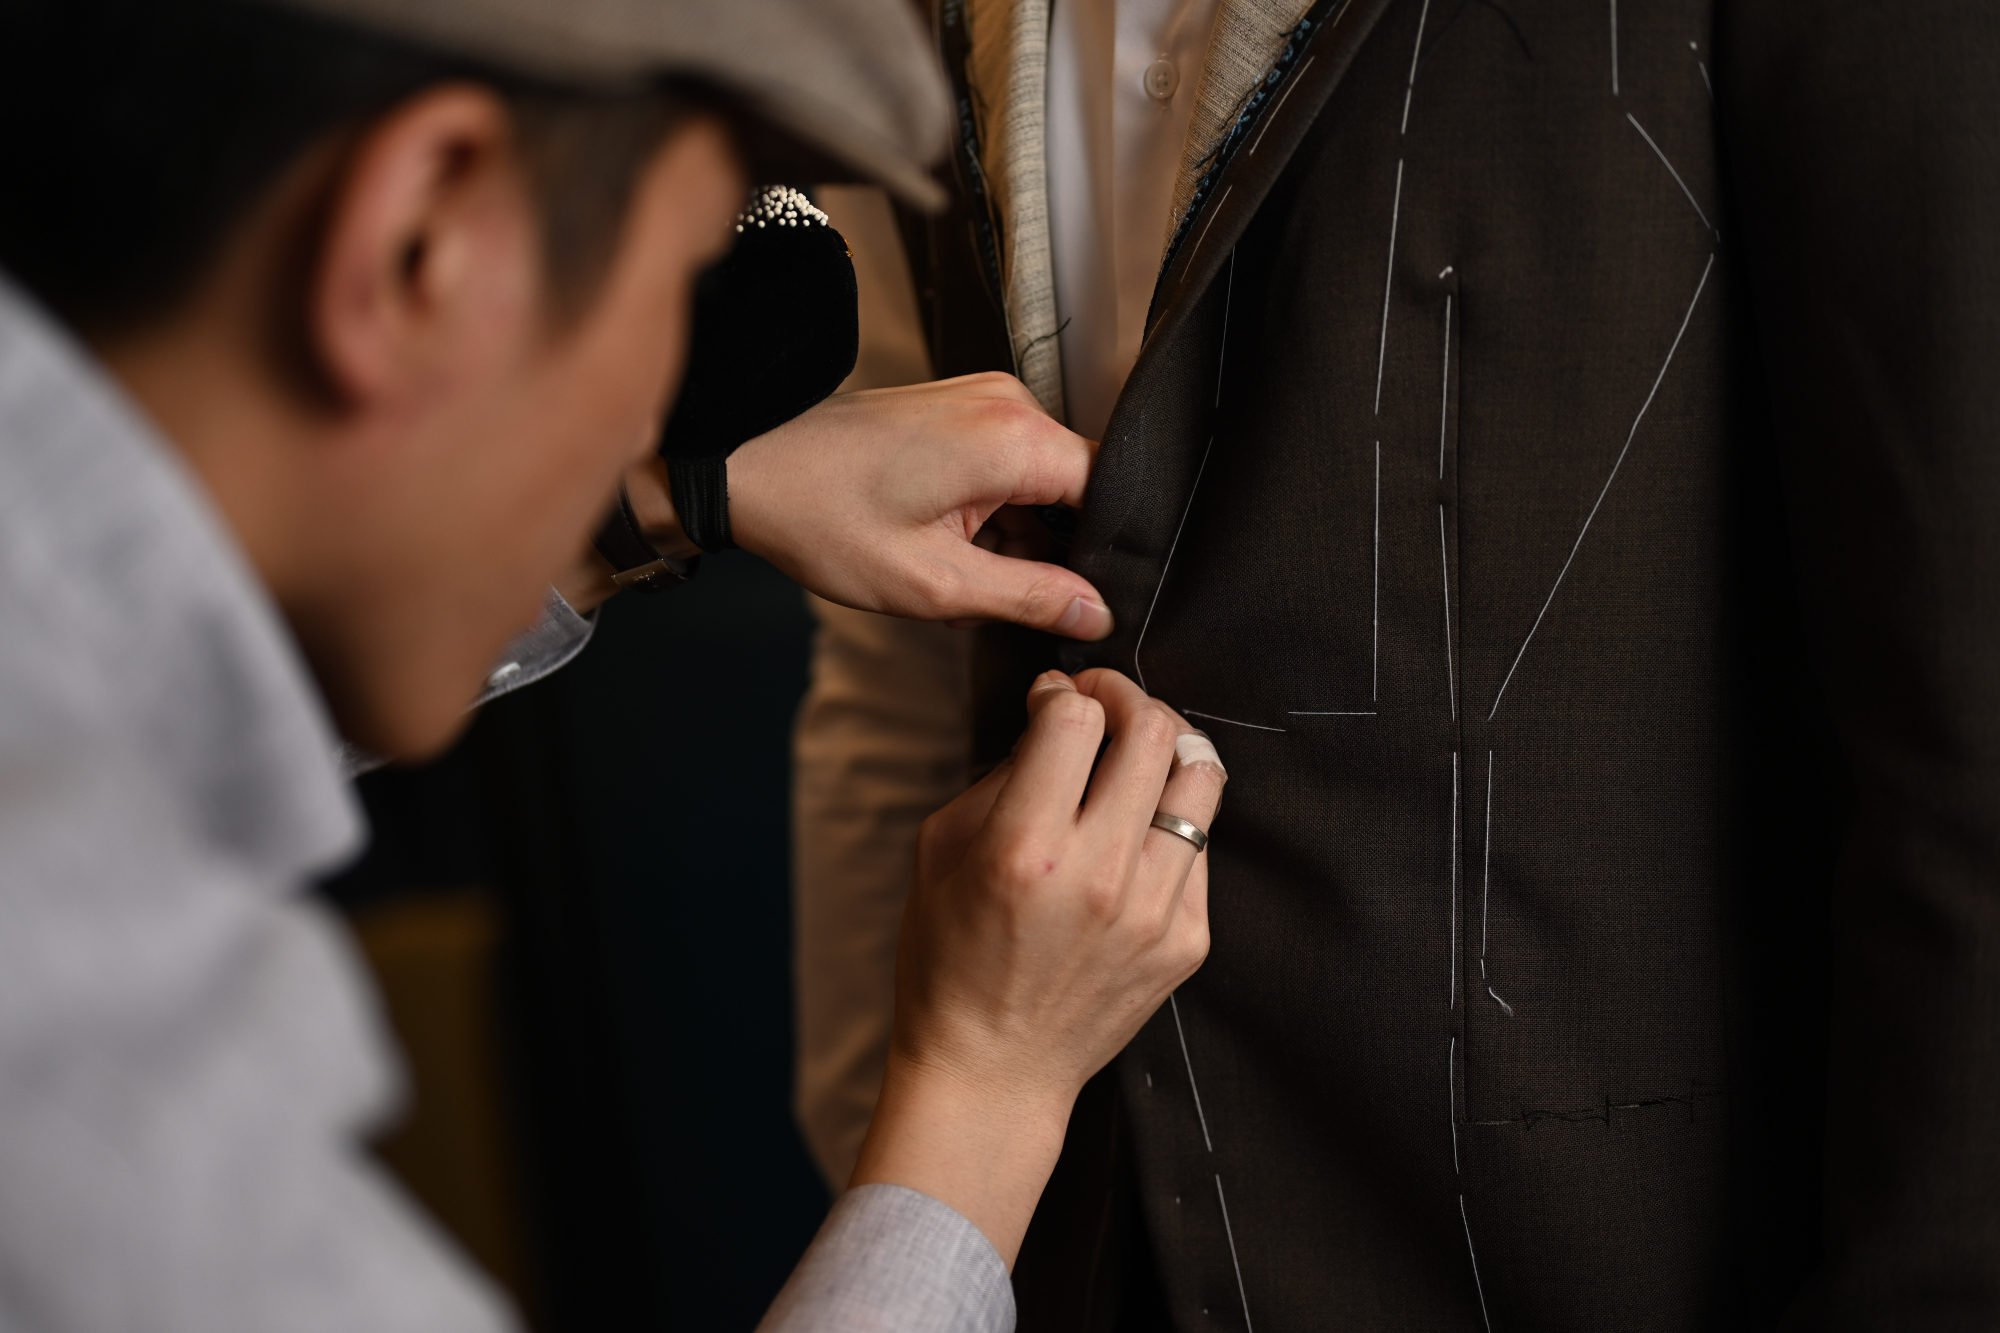 The suit is not dead but it’s getting more casual, say tailors amid ...